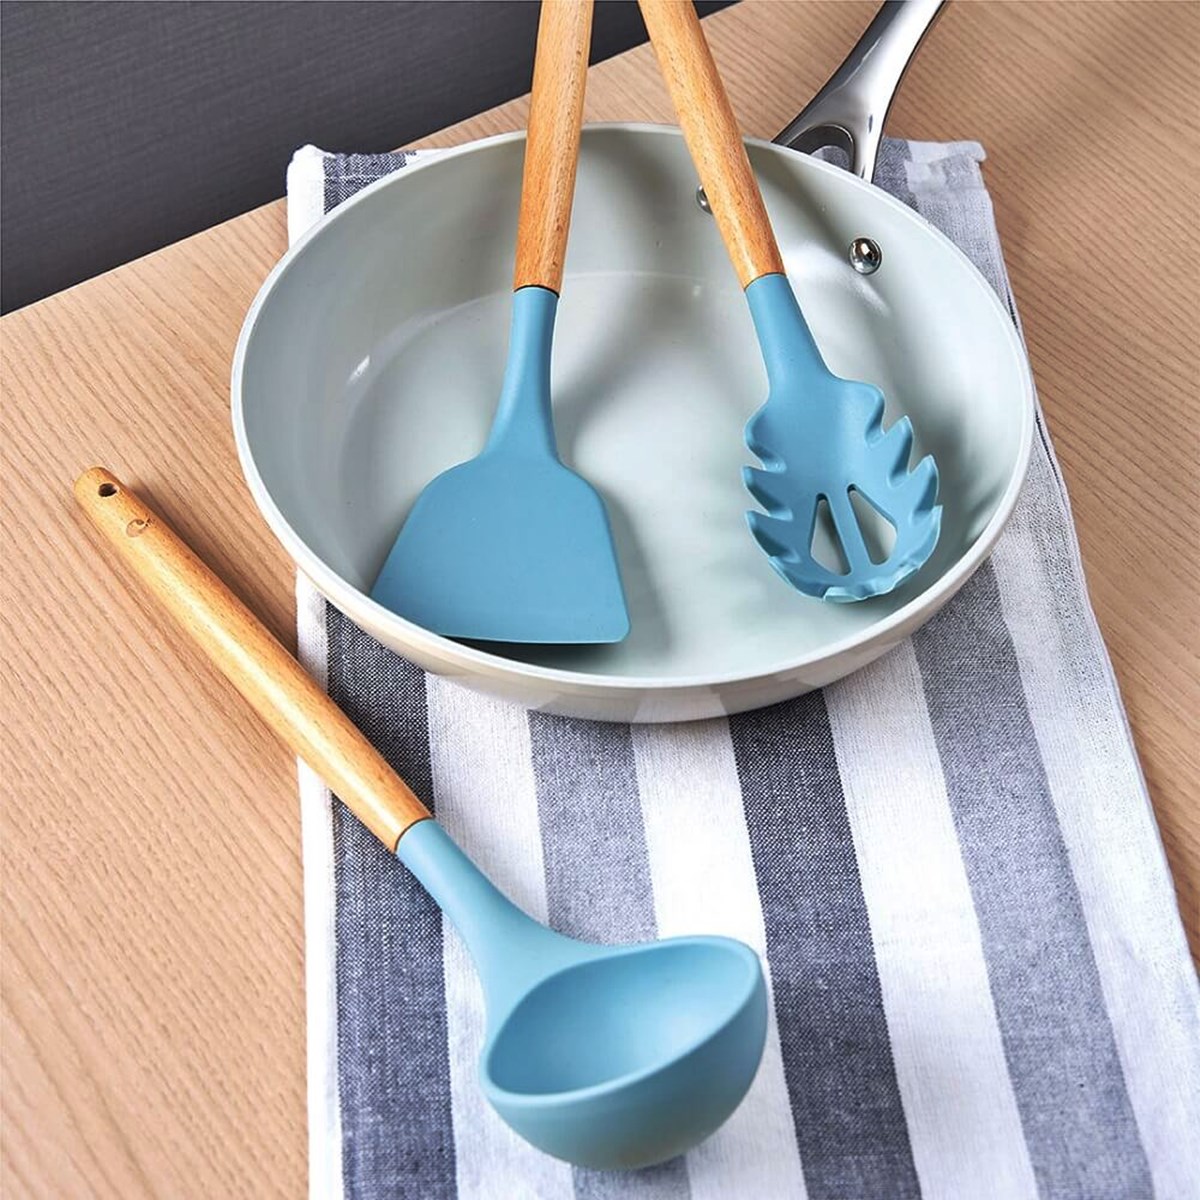 Smirly Kitchen Utensil Set & Holder - Essentials for New Home & 1st Apartment - Silicone Spatula & Cooking Spoon Set for Nonstick Cookware